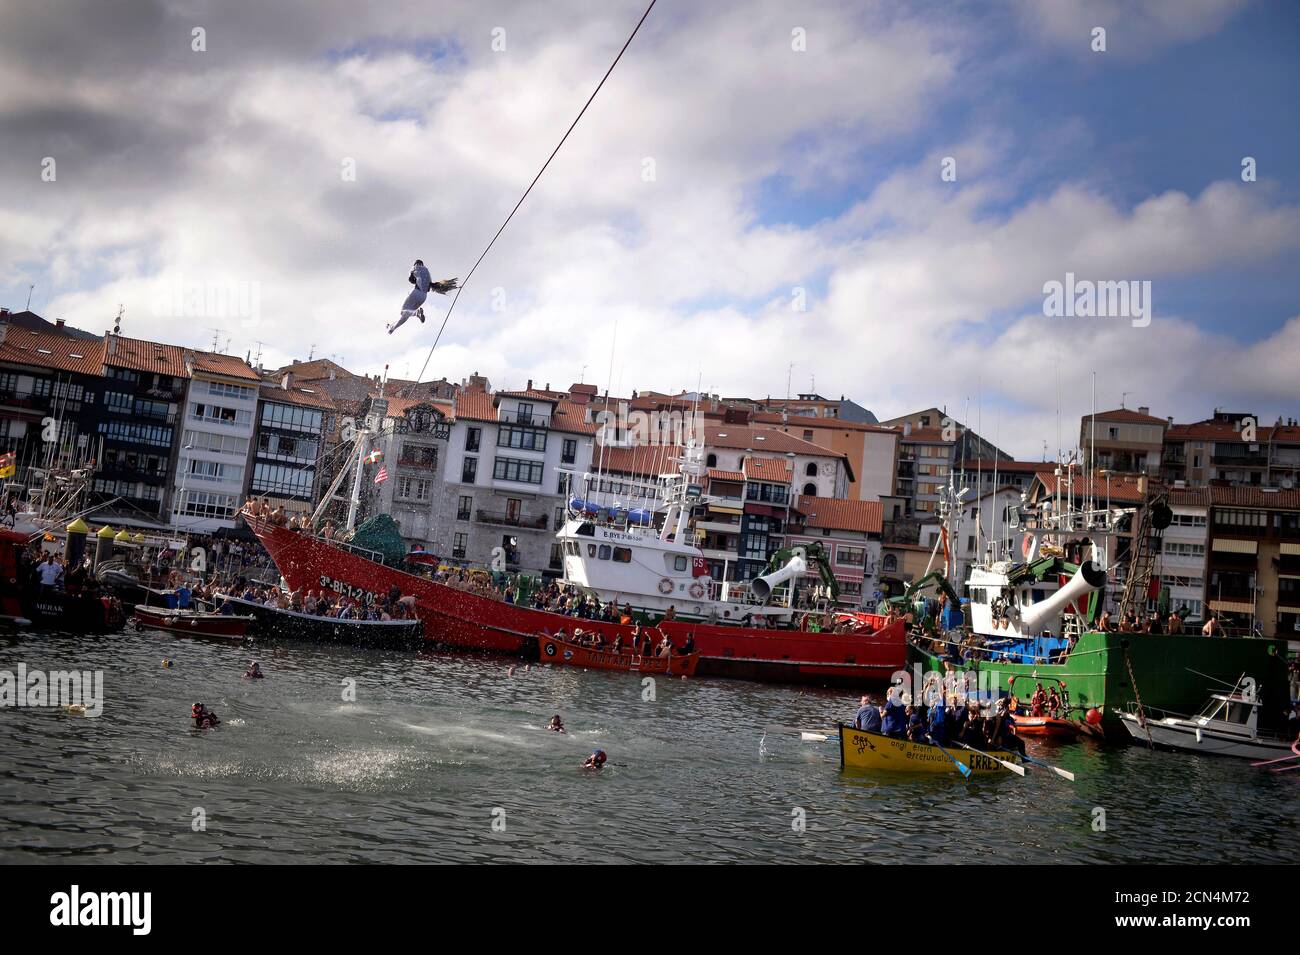 A man attempts to pull the neck off a dead goose while being repeatedly  plunged into the water during Antzar Eguna (Day Of The Goose) in the Basque  fishing town of Lekeitio,